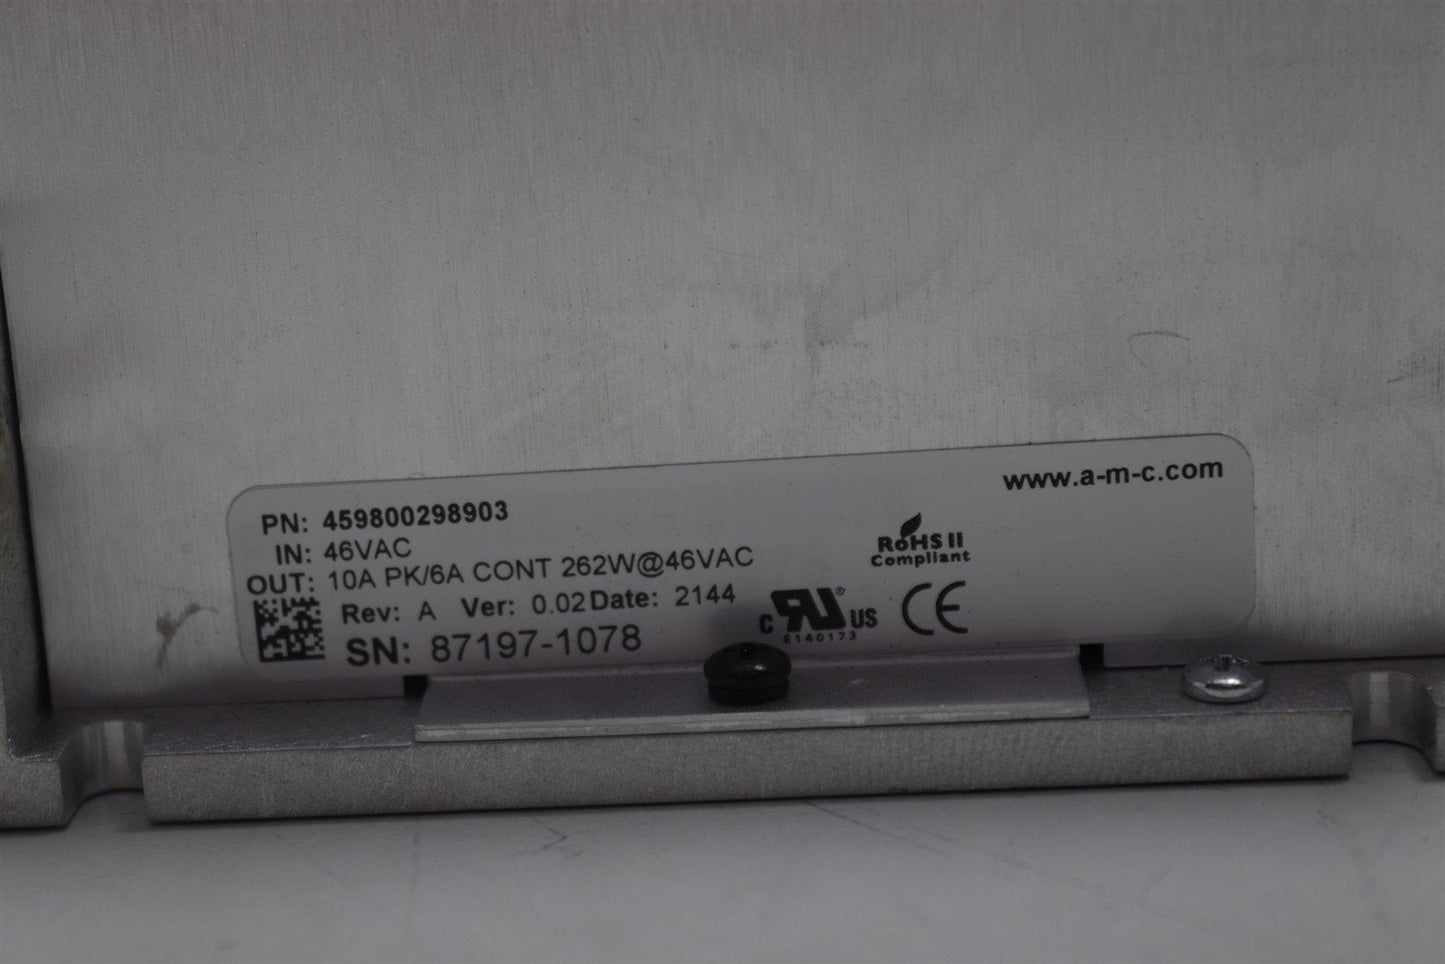 Philips iCT Ingenuity Brilliance CT Motion Controller ACS Module 459800298903